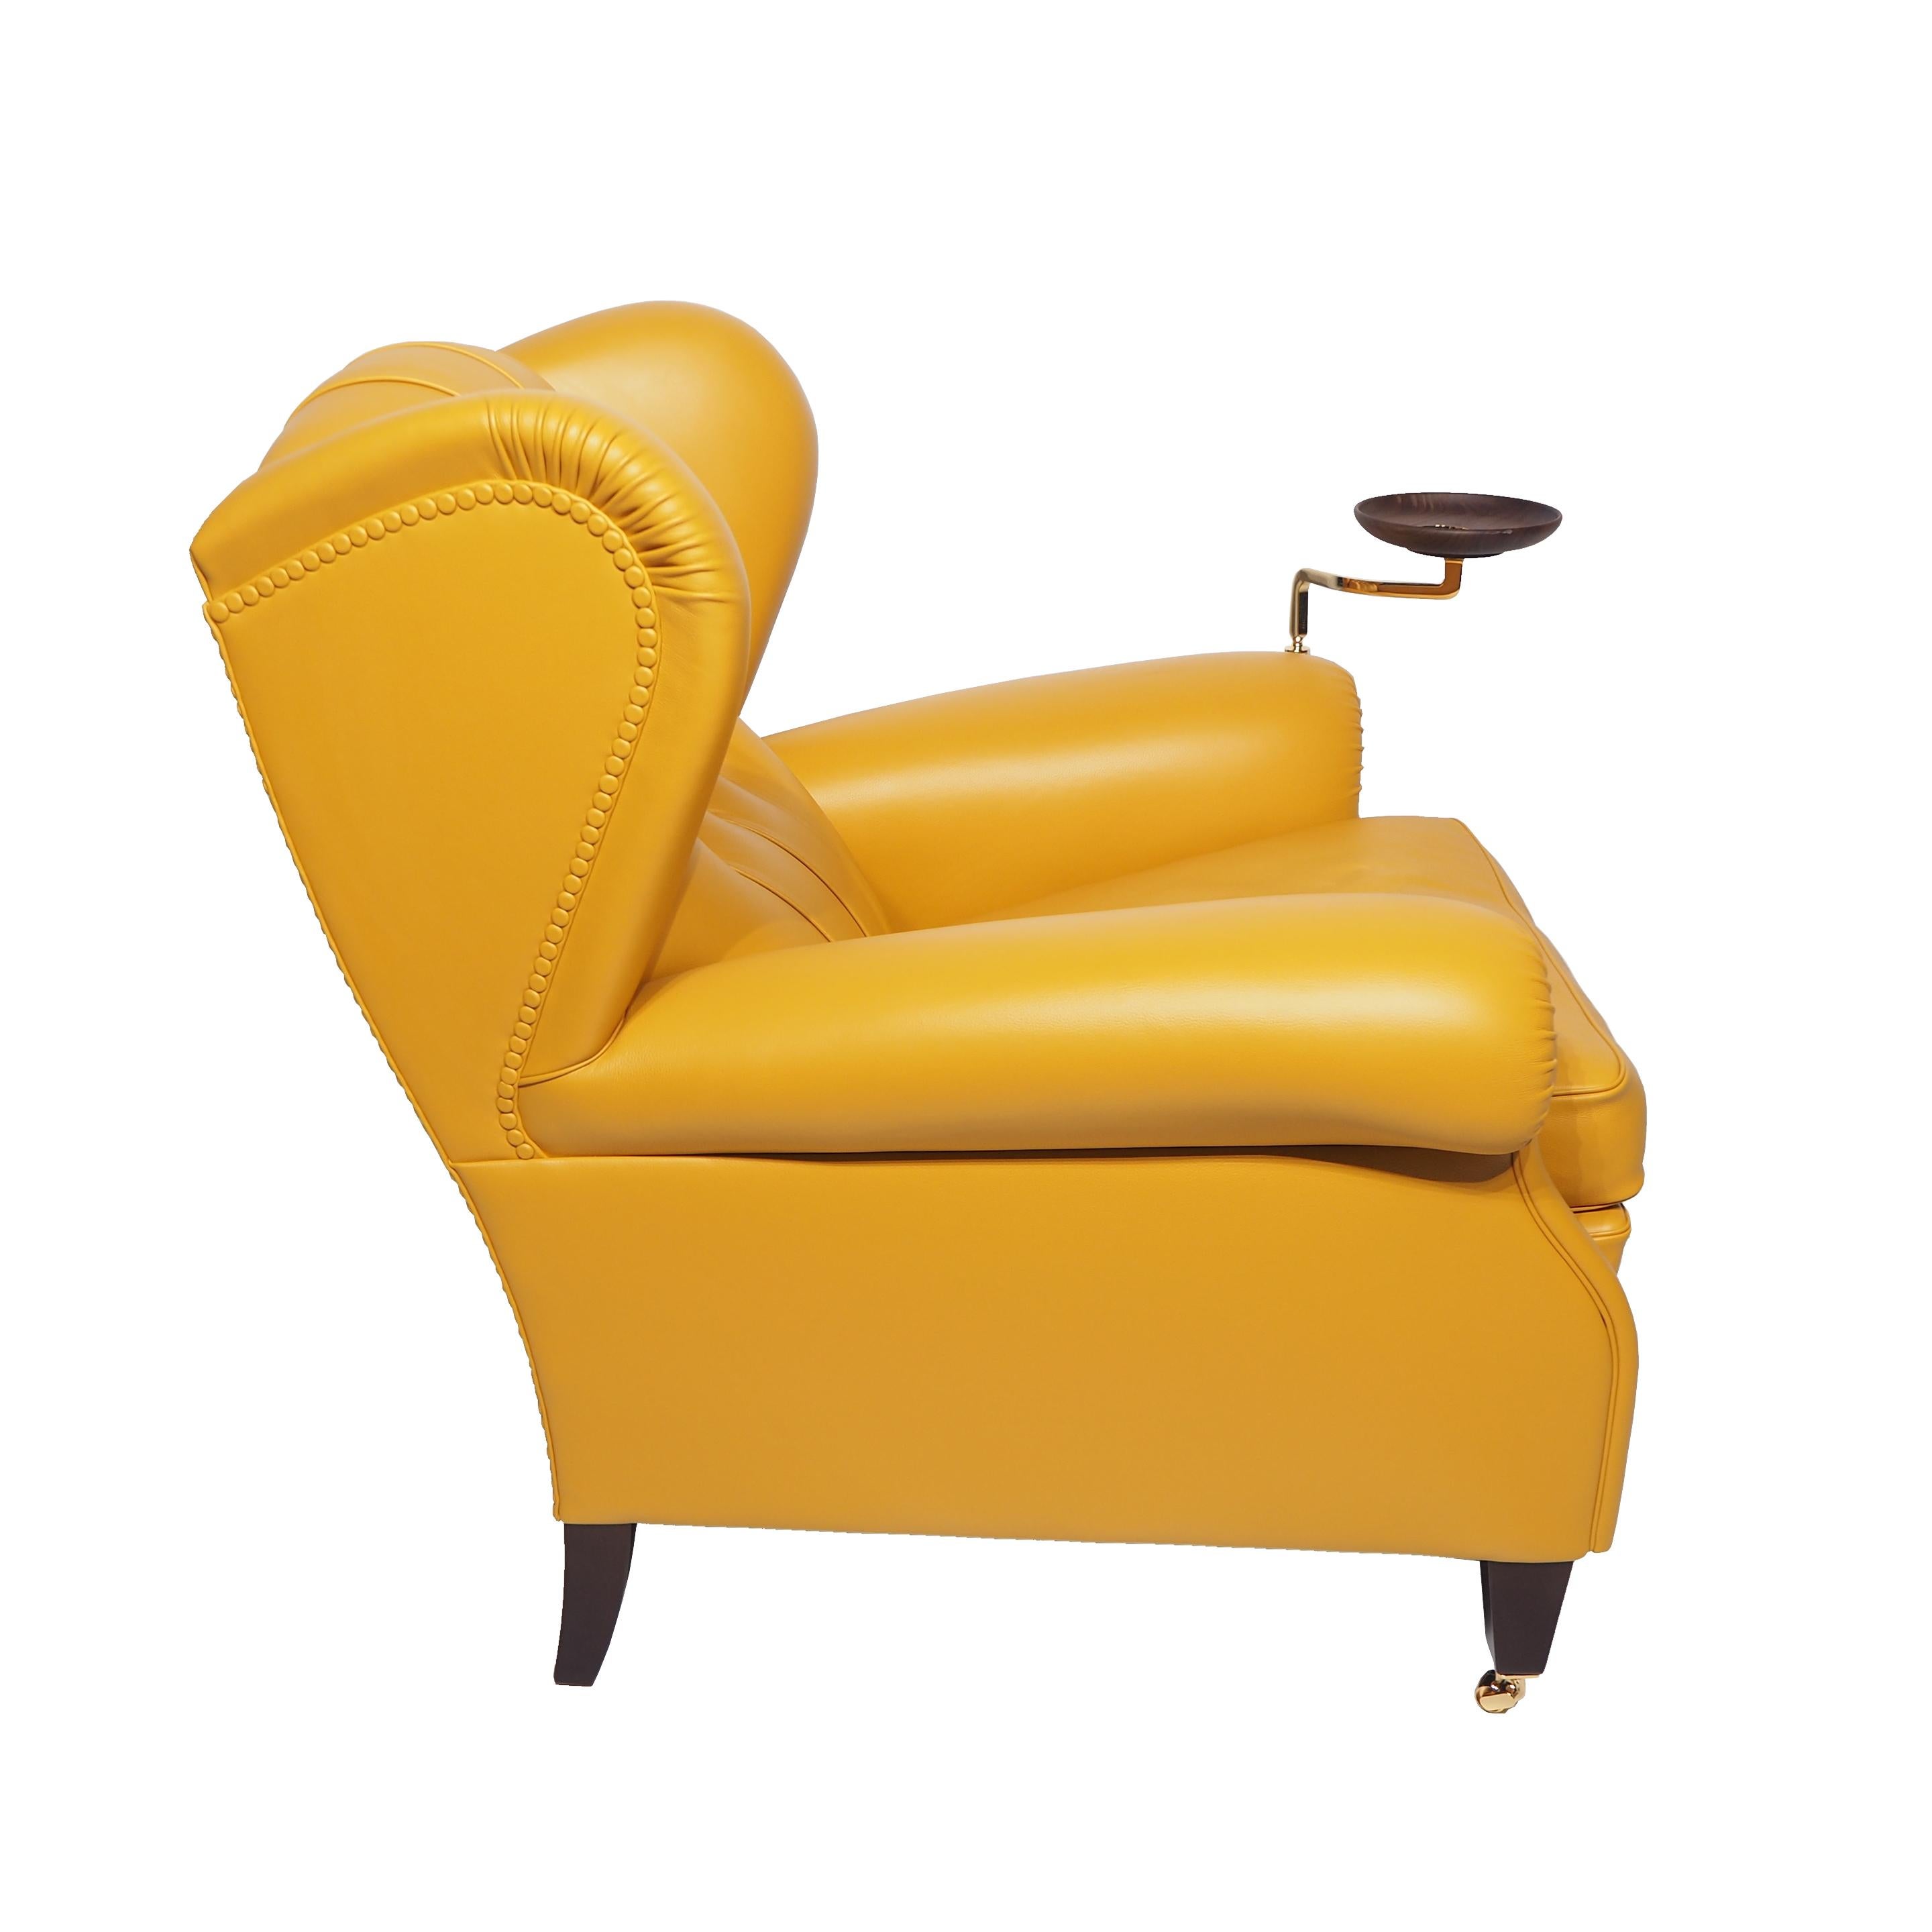 The “1919” armchair, named after the year in which it was designed, is actually archived under the code “128”. It is thought that it was custom-designed by Renzo Frau for Filiberto Ludovico of Savoy, Duke of Pistoia. Despite being commissioned by a